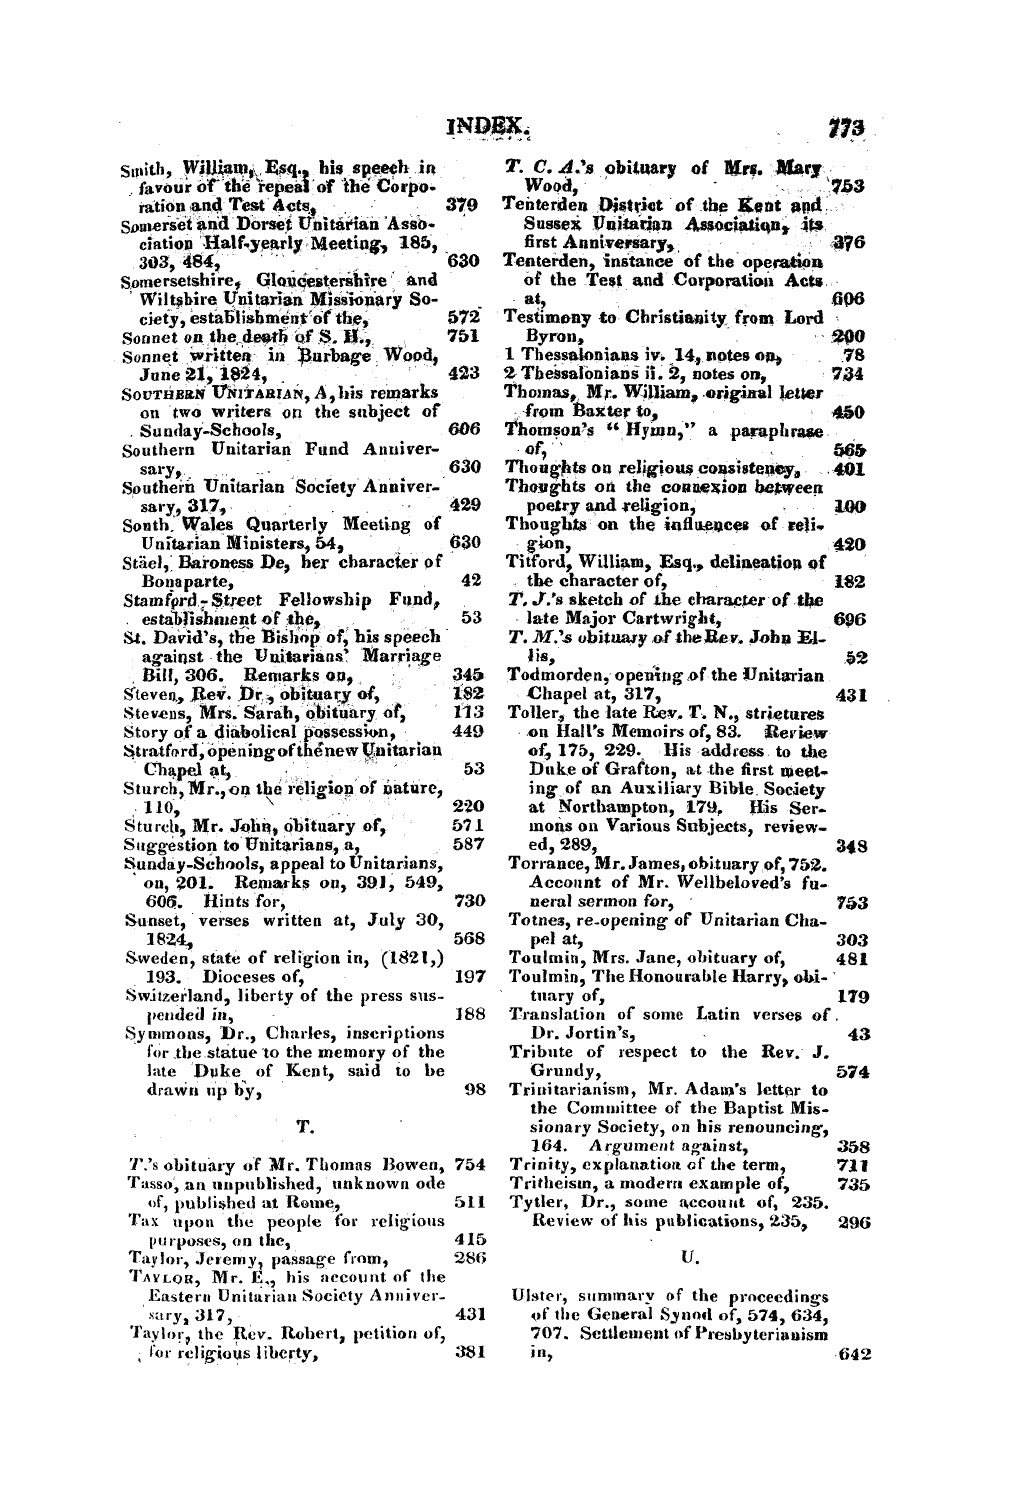 Monthly Repository (1806-1838) and Unitarian Chronicle (1832-1833): F Y, 1st edition, End matter: 13